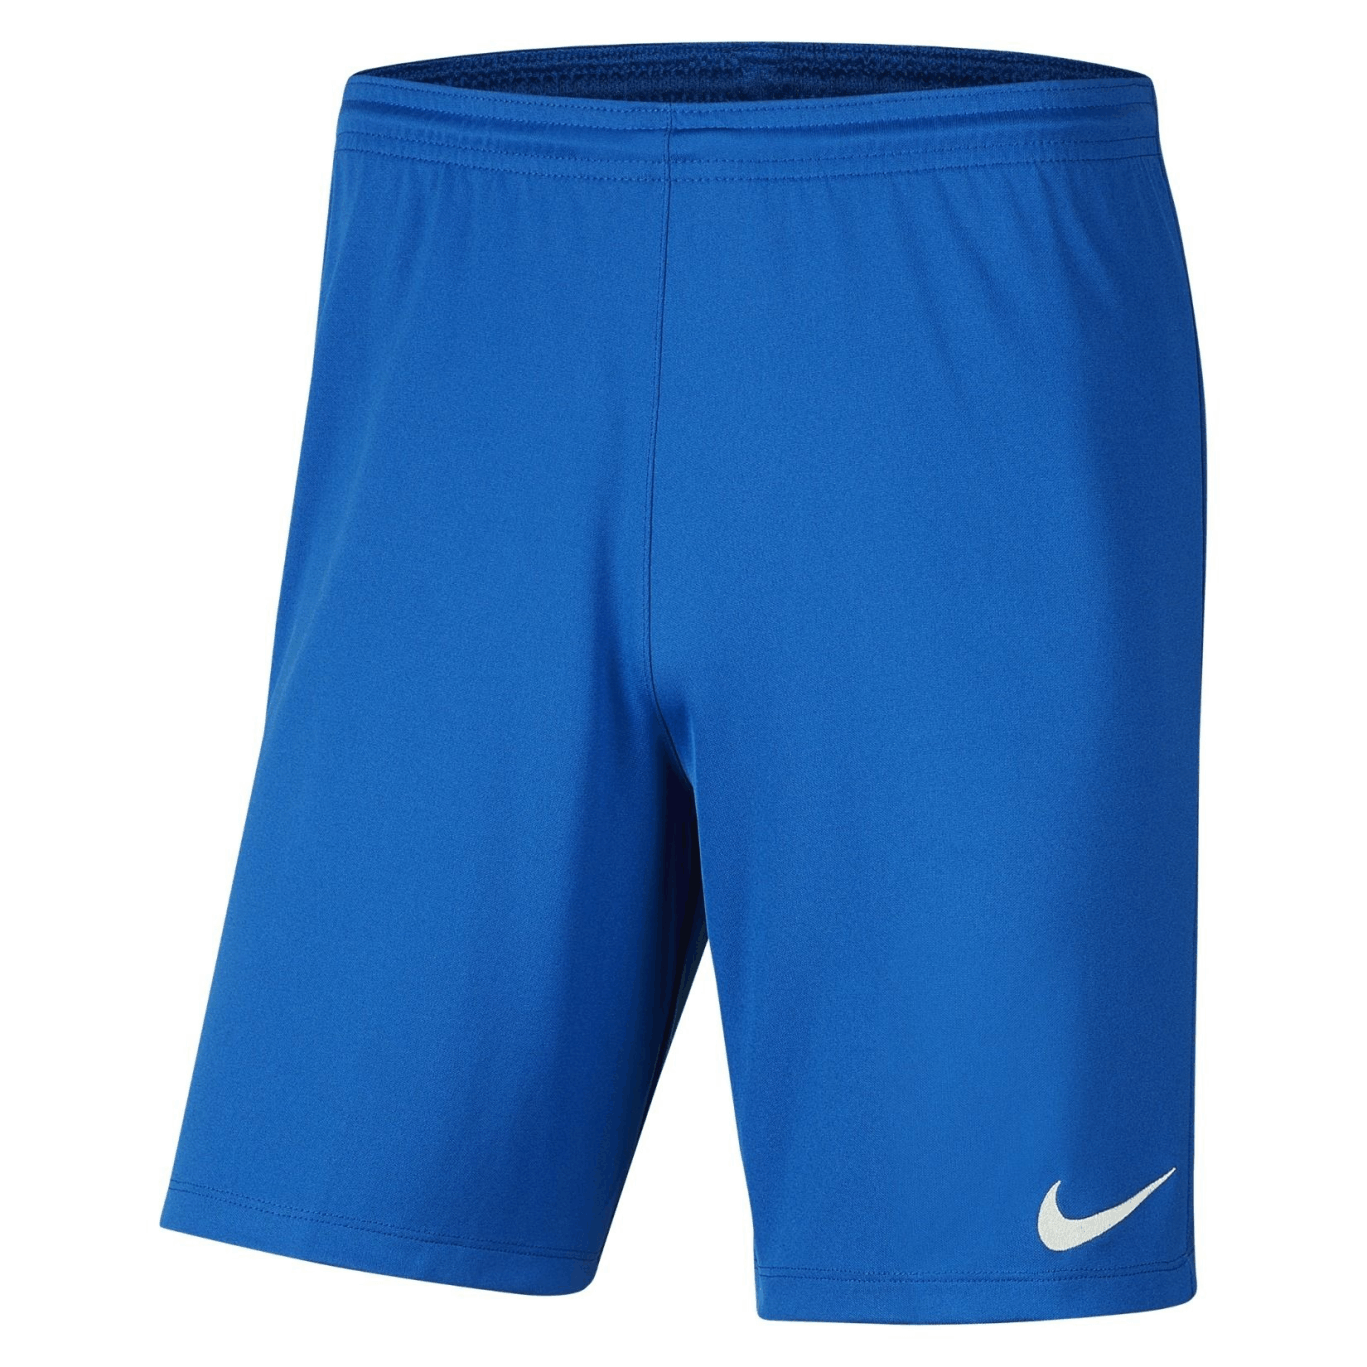 YCDS - Park III Shorts - Blue